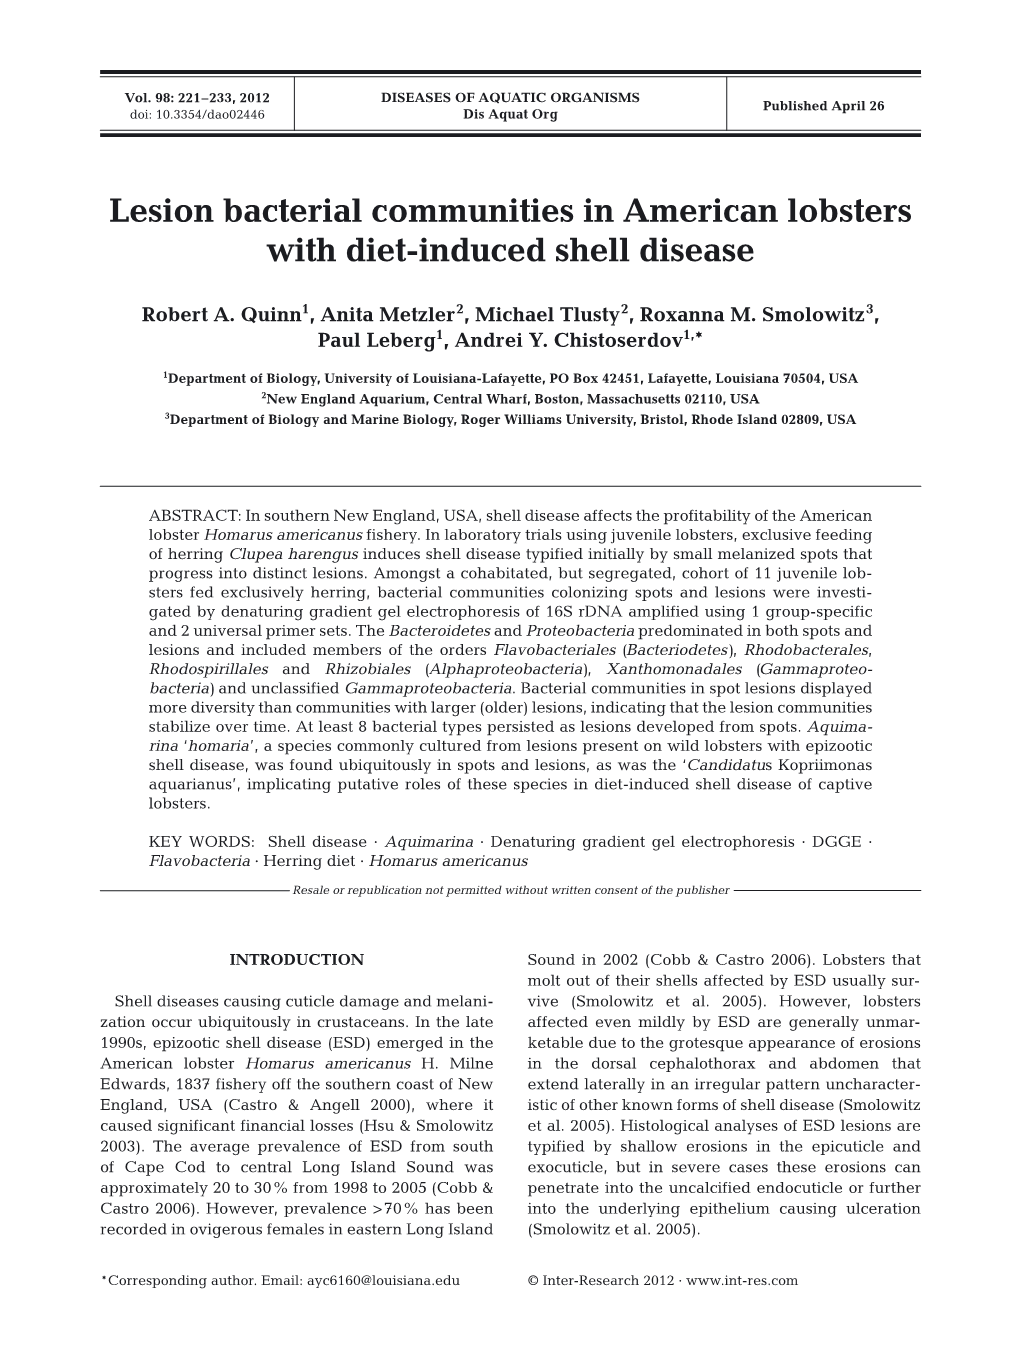 Lesion Bacterial Communities in American Lobsters with Diet-Induced Shell Disease